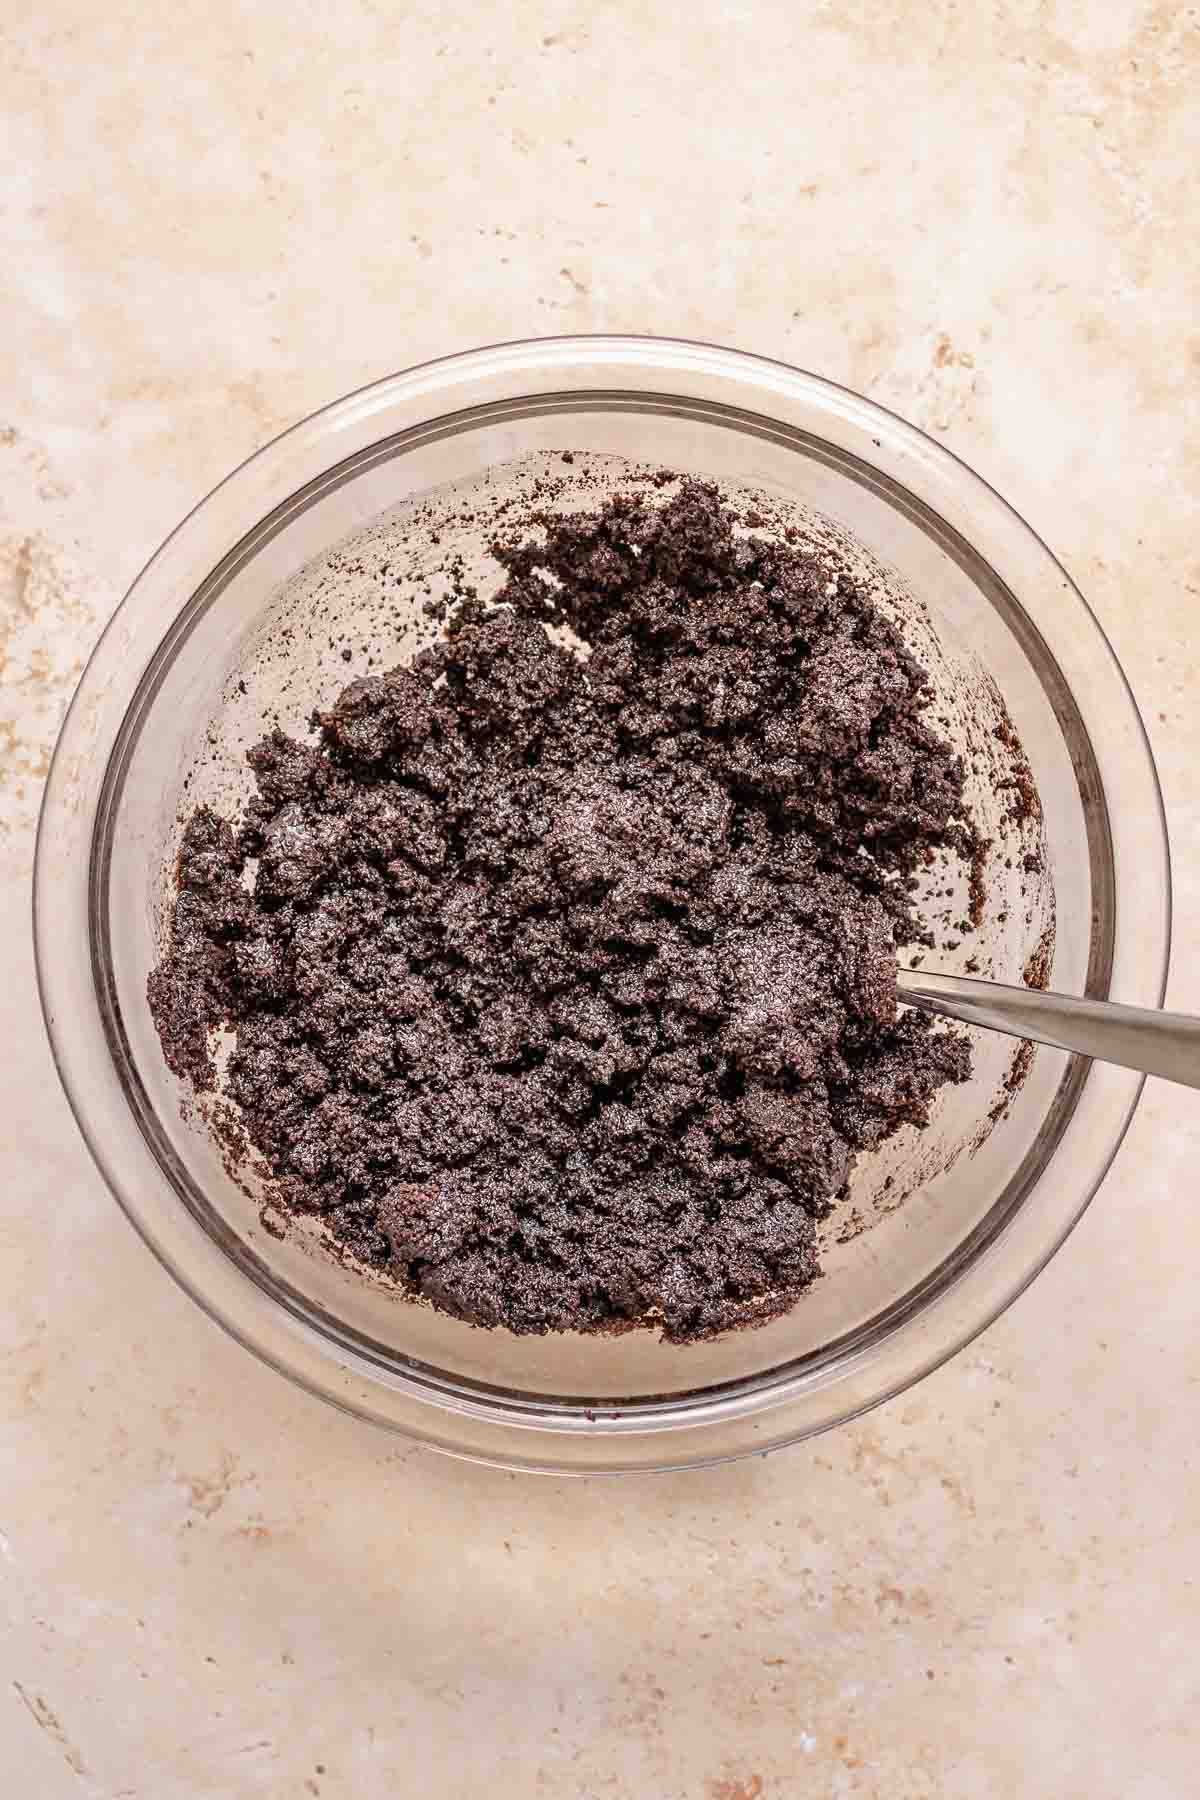 Oreo crust mixed in a bowl.